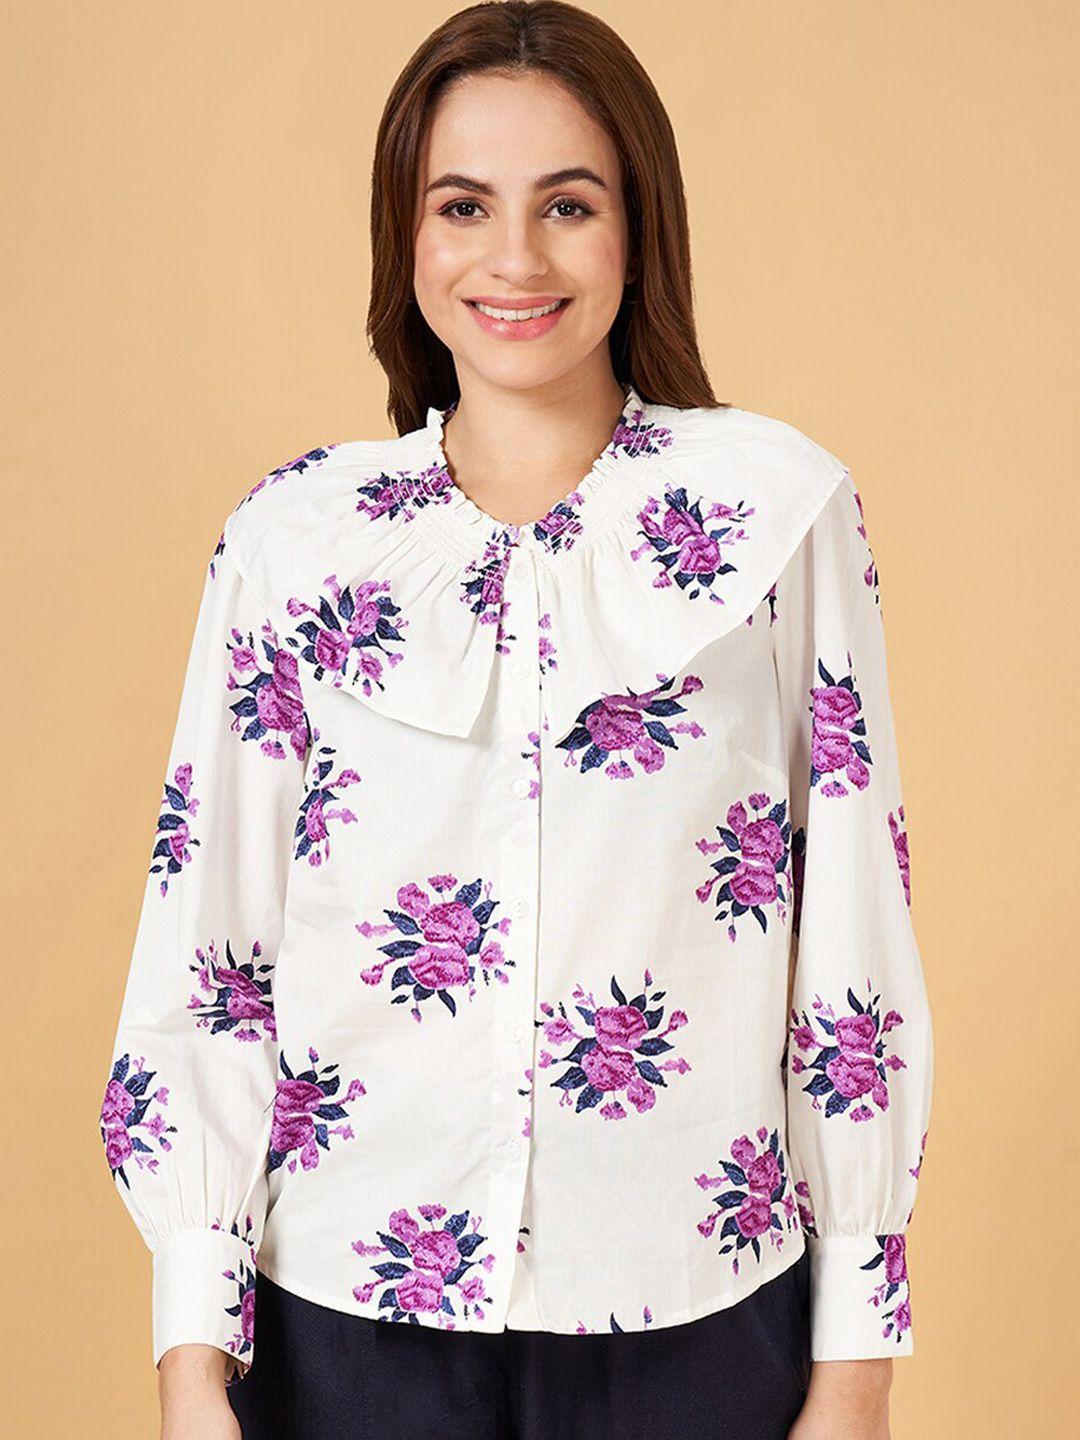 honey by pantaloons floral printed cuffed sleeves gathered detailed cotton shirt style top